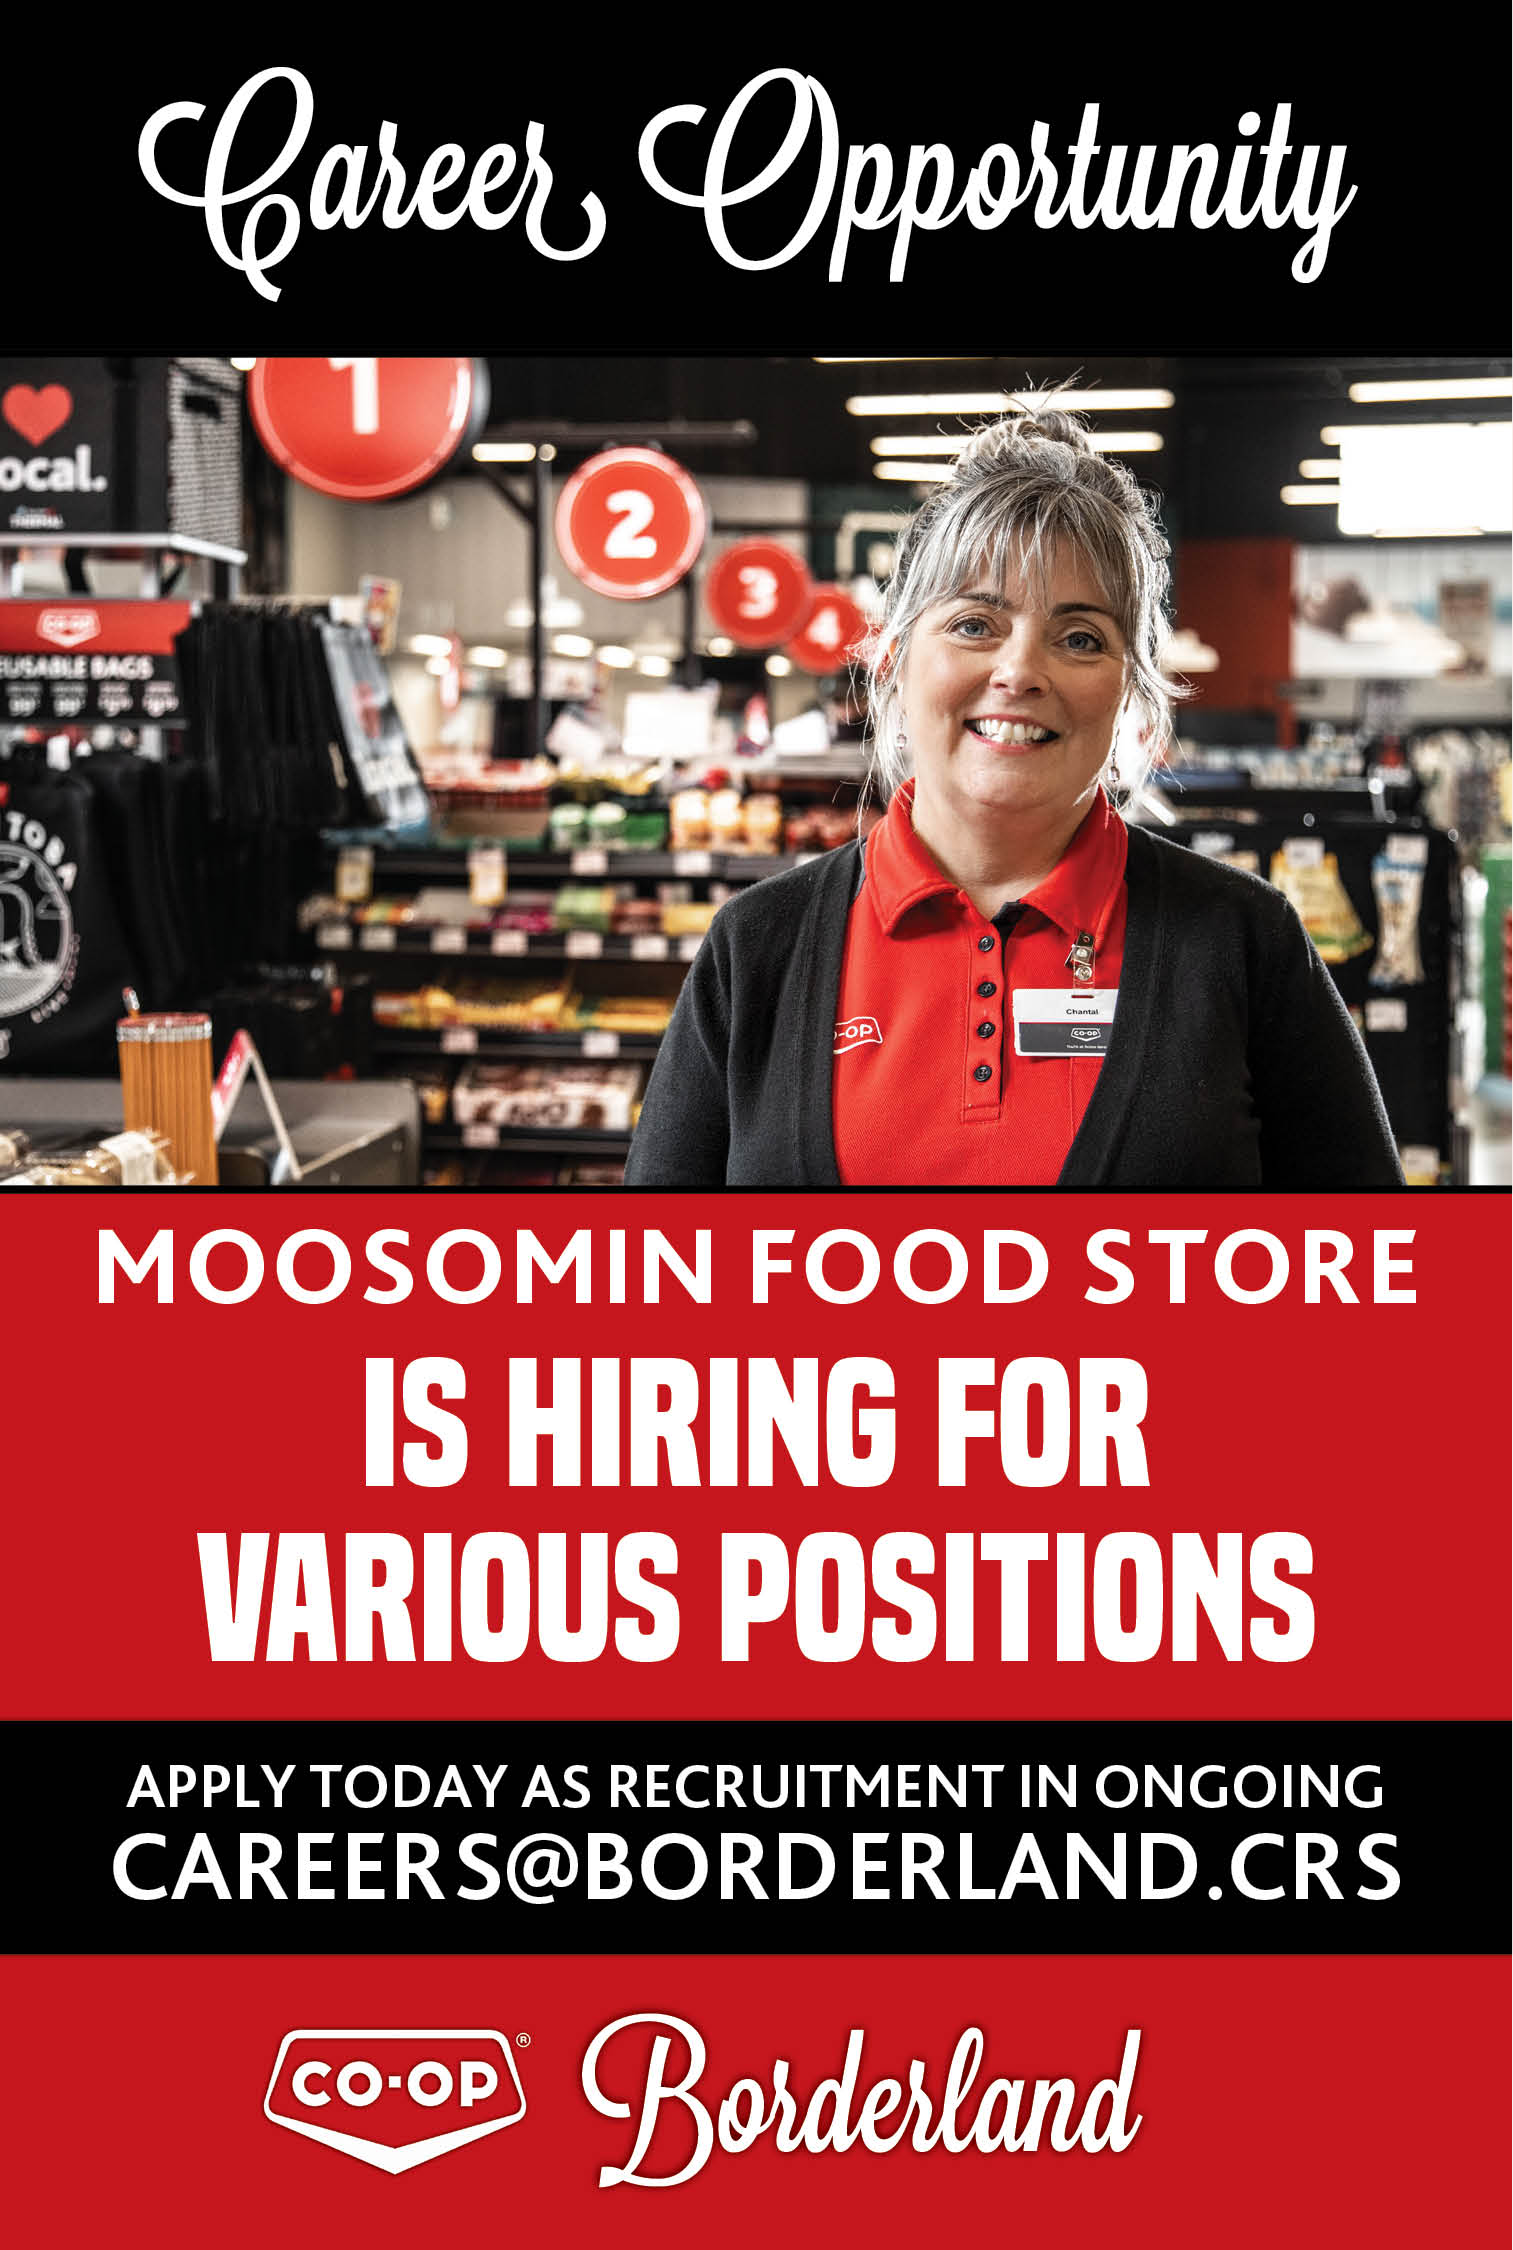 Borderland Co-op Food Store - Moosomin - Help Wanted - Various Positions  